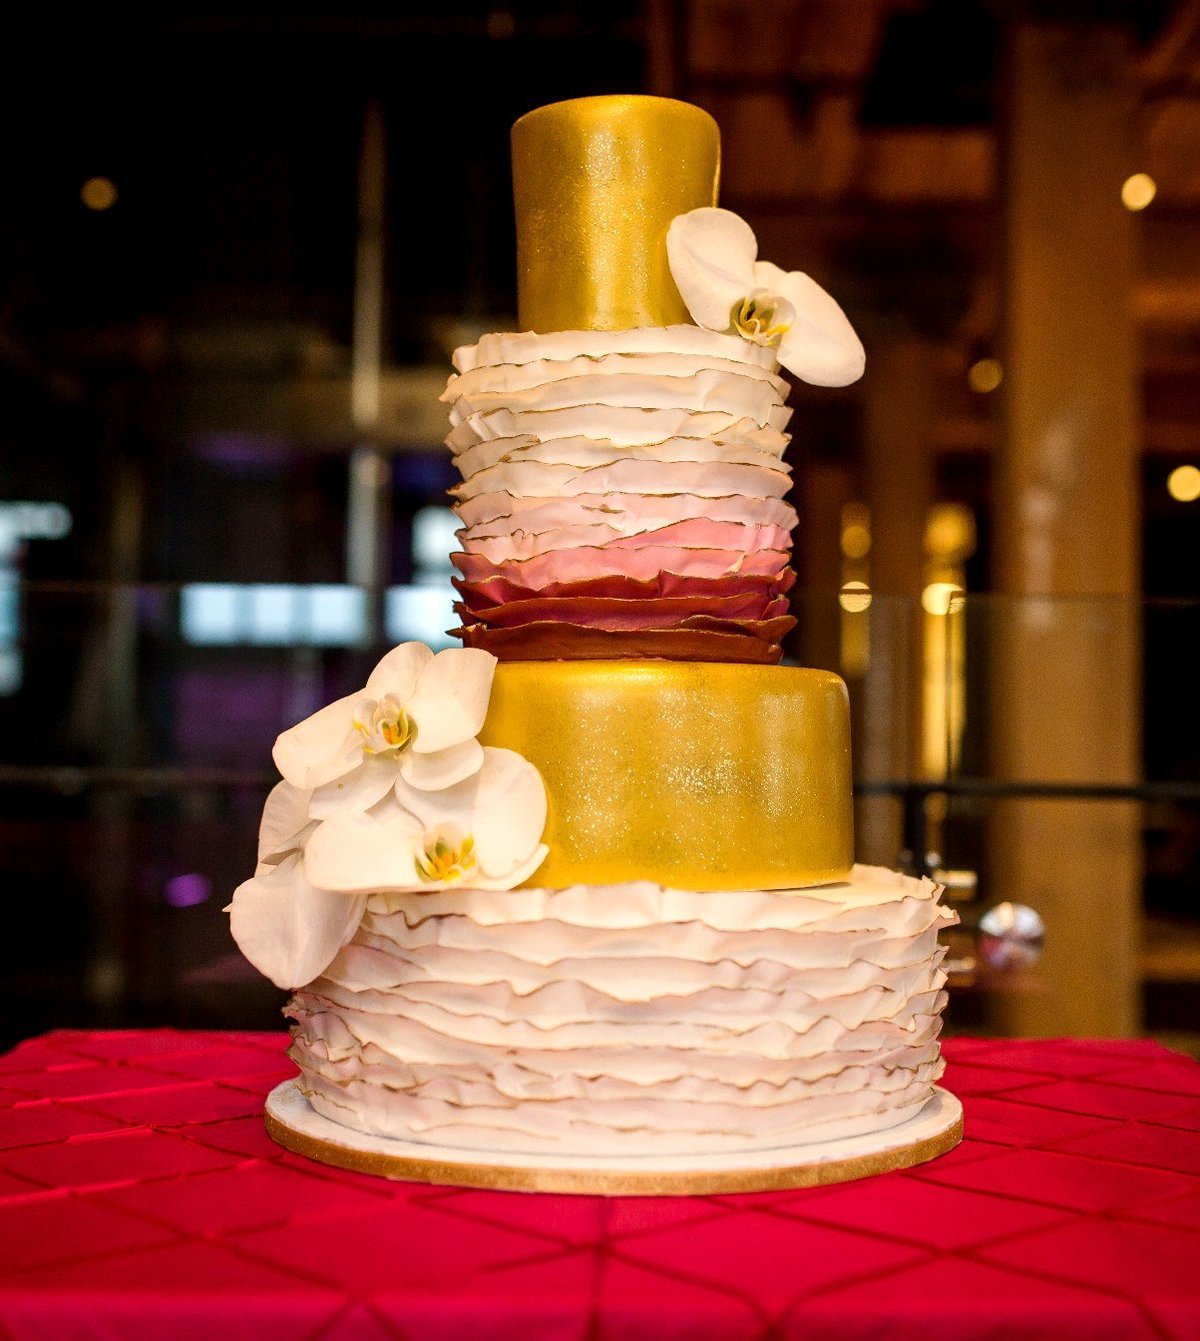 Whippt Desserts & Catering - Wedding Cake - photo by TLAW2